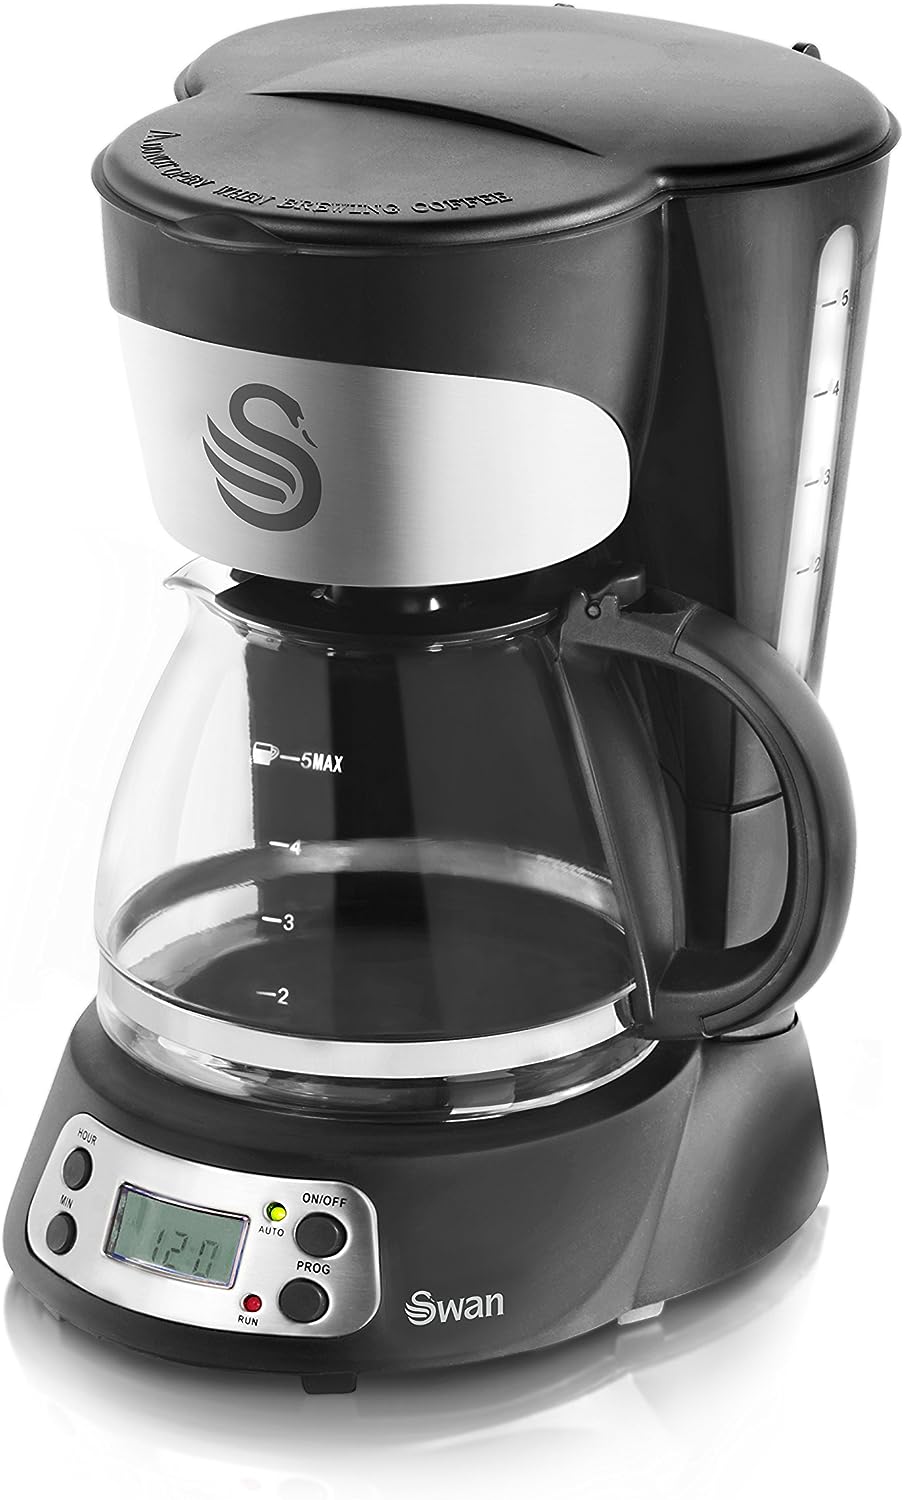 Swan 750ml Programmable Coffee Maker with Anti Drip Function, 700w, Black